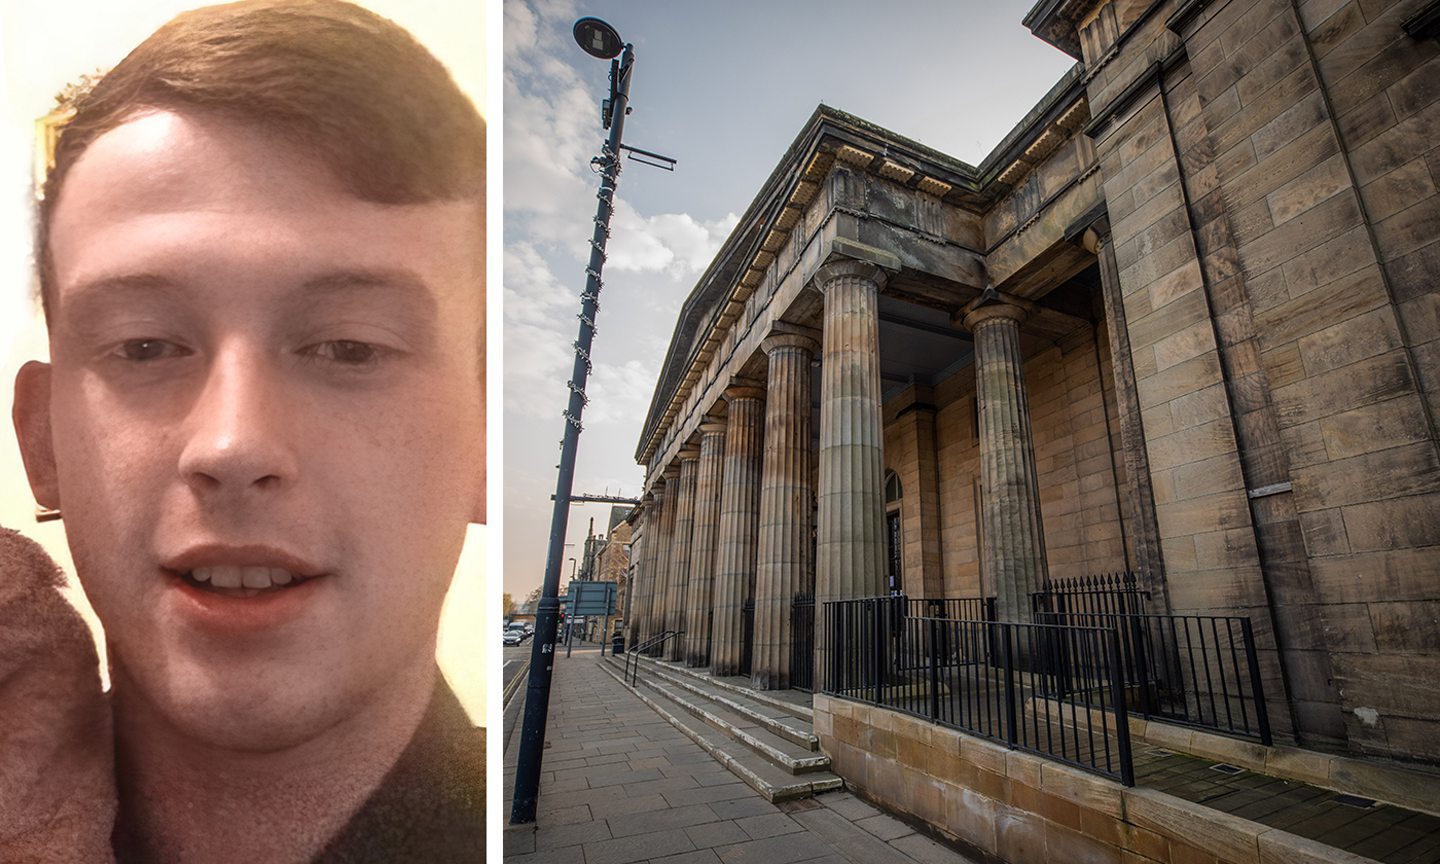 Mum-biting thug from Alyth smashed up car with ornate hedgehog